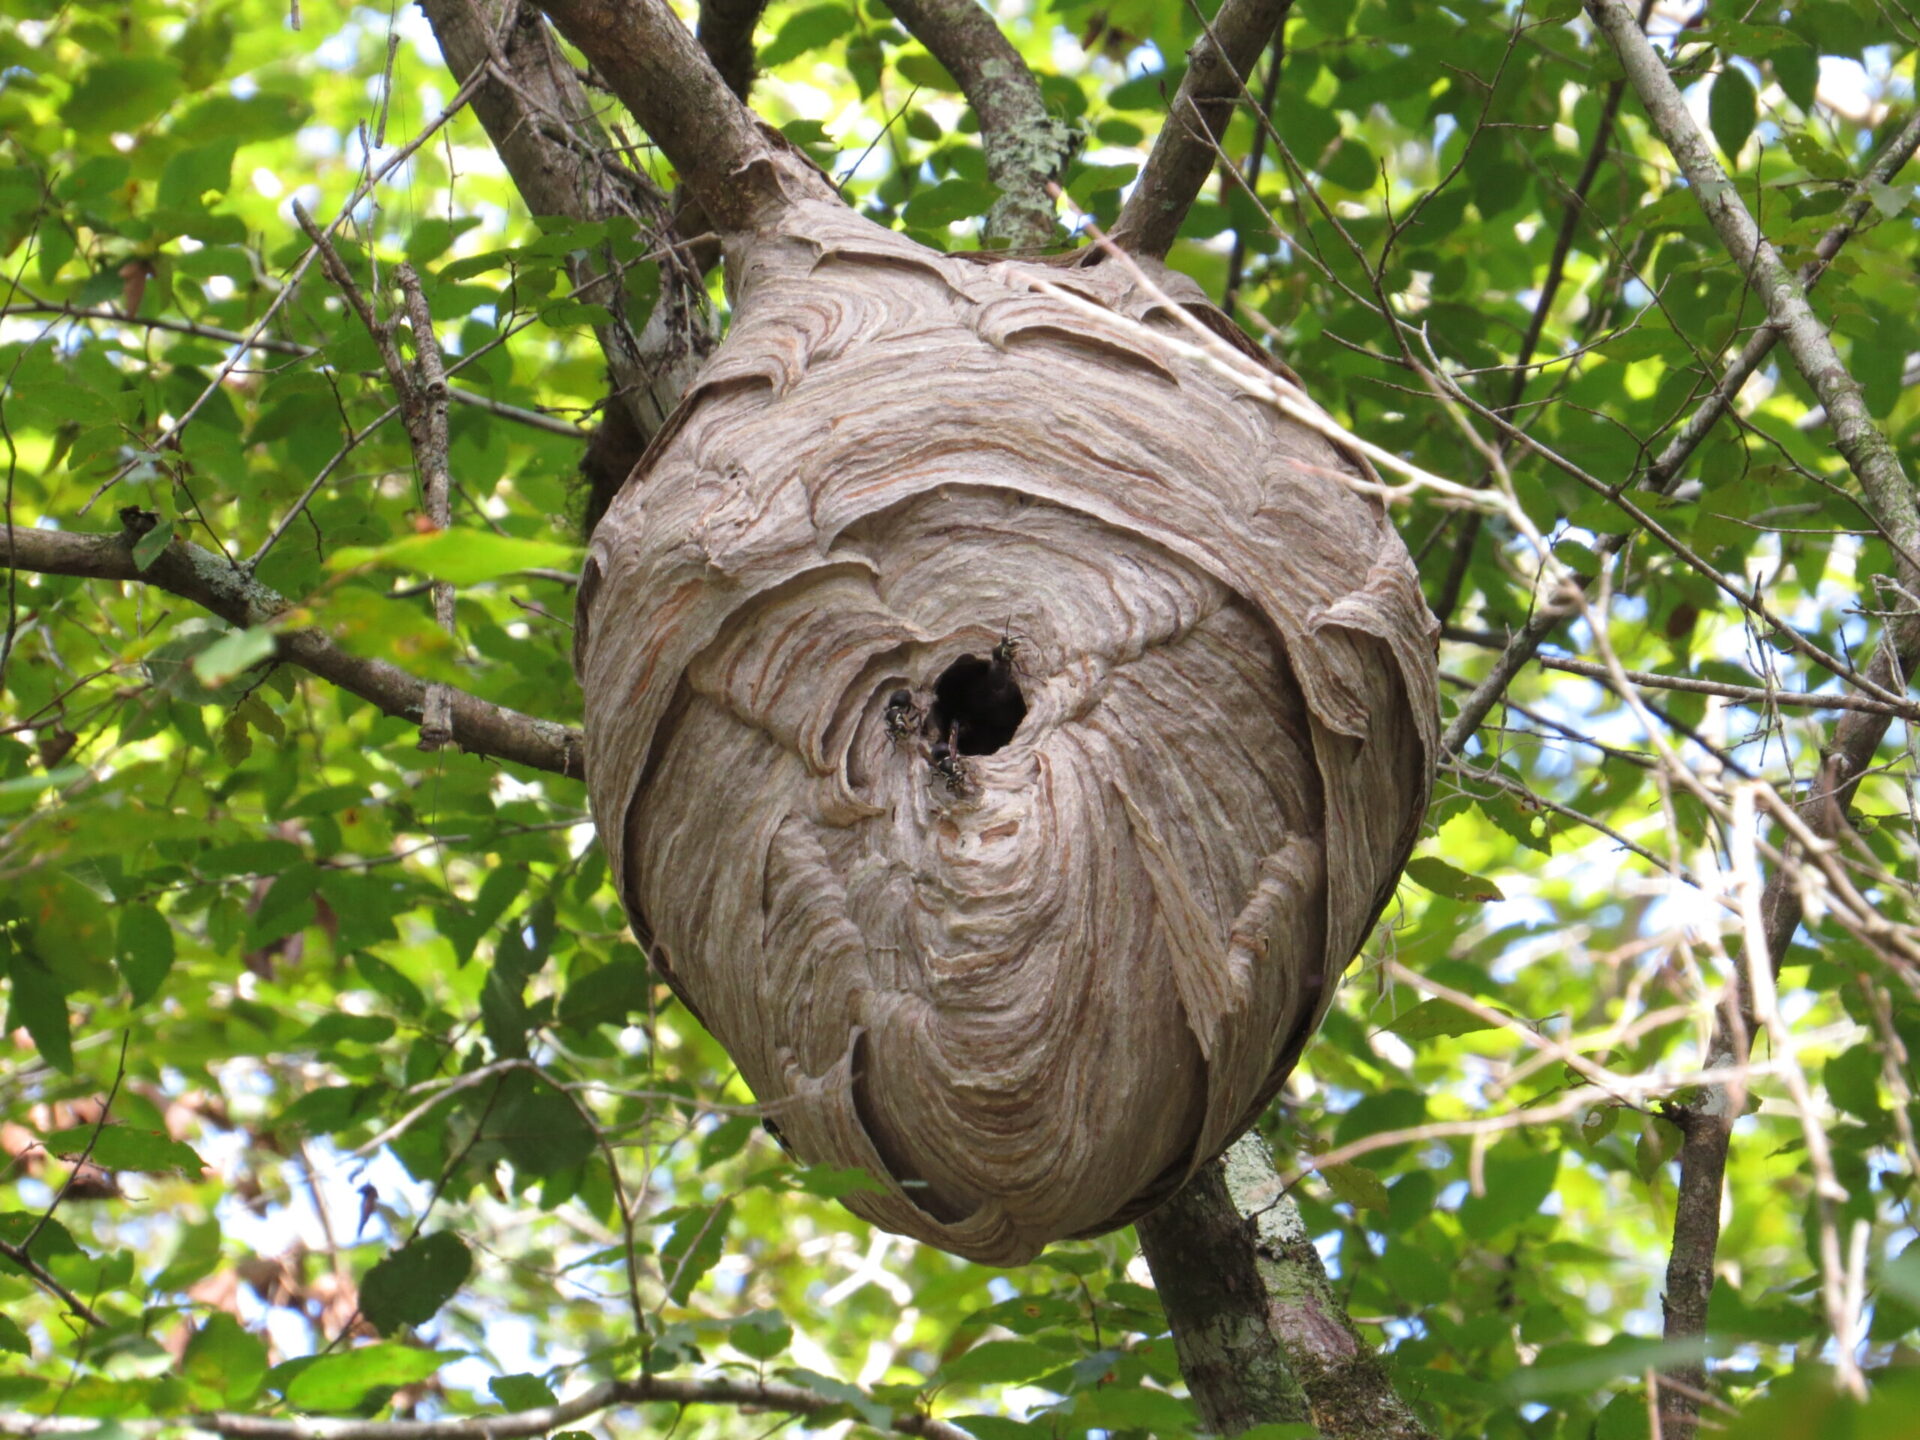 light-gray hornet nest built on brown-colored tree branches with green leaves in background